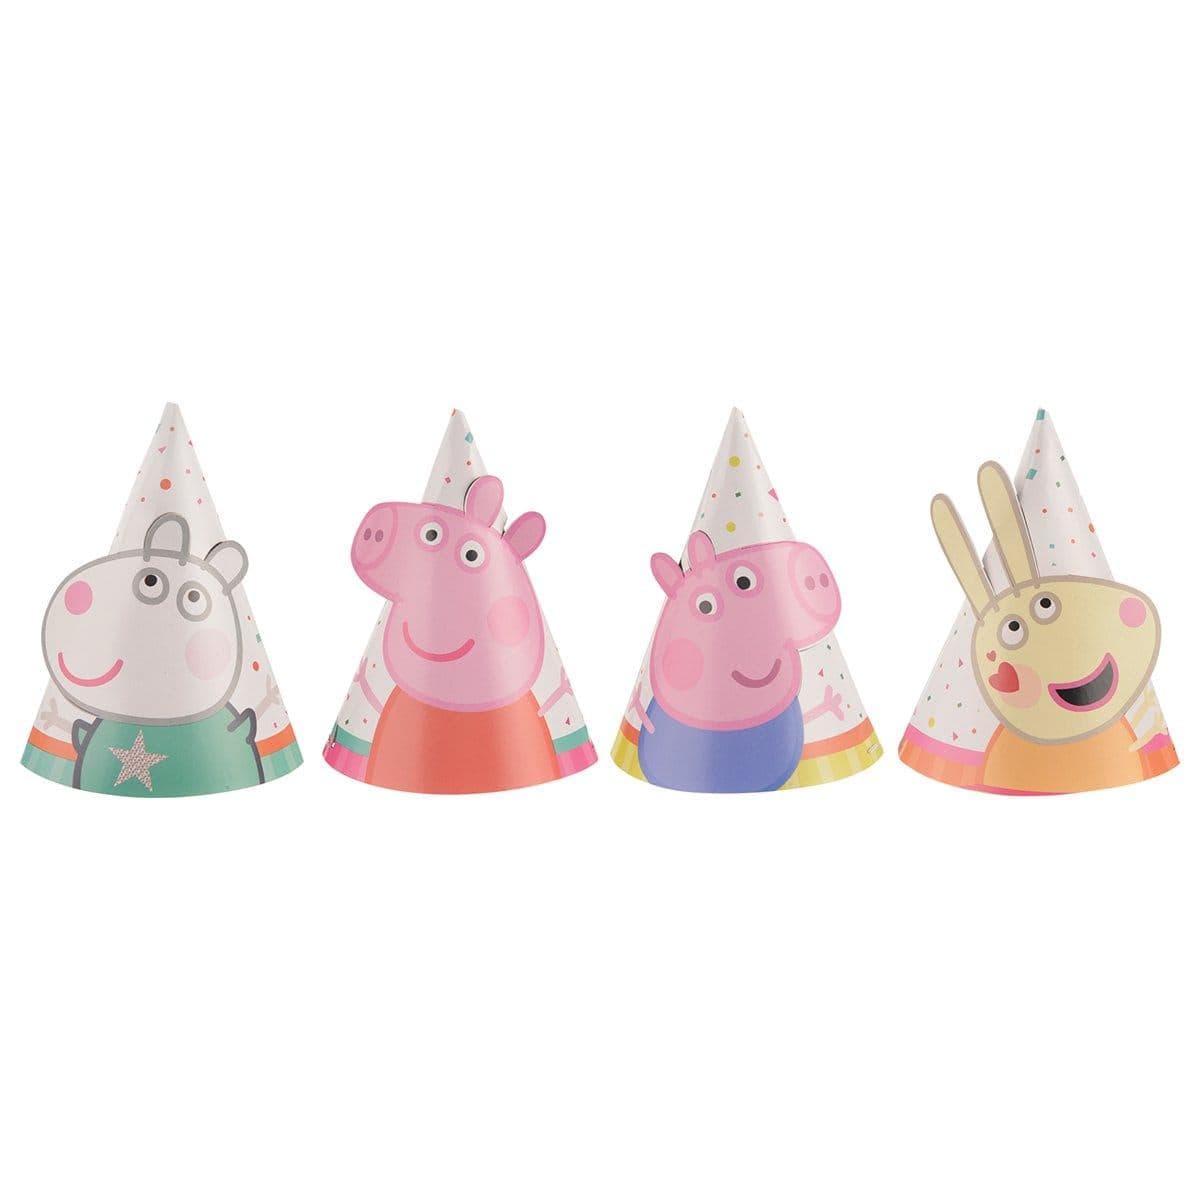 Buy Kids Birthday Peppa Pig Confetti Mini Party Hats, 8 Counts sold at Party Expert